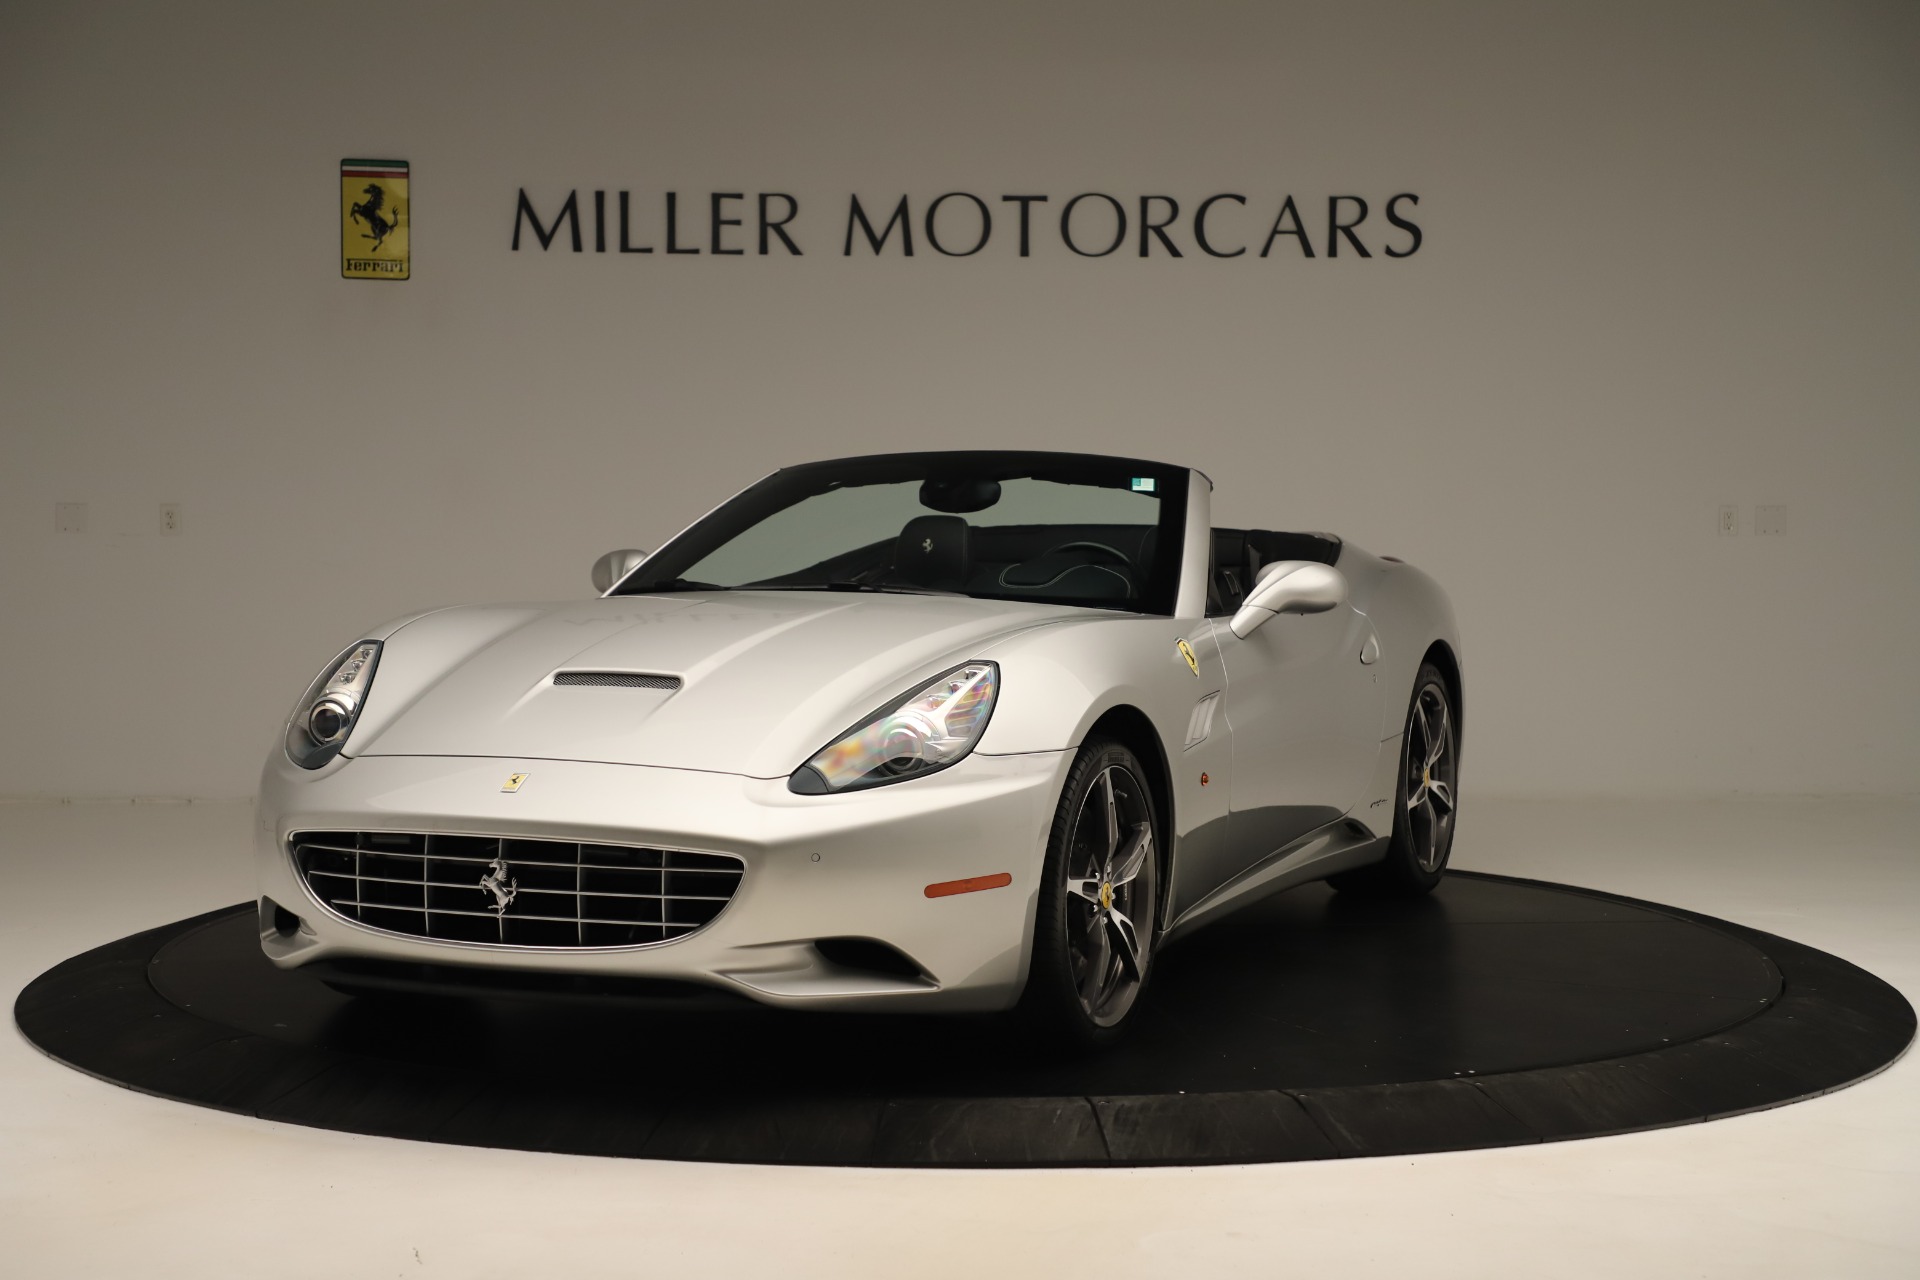 Used 2014 Ferrari California 30 for sale Sold at Bentley Greenwich in Greenwich CT 06830 1